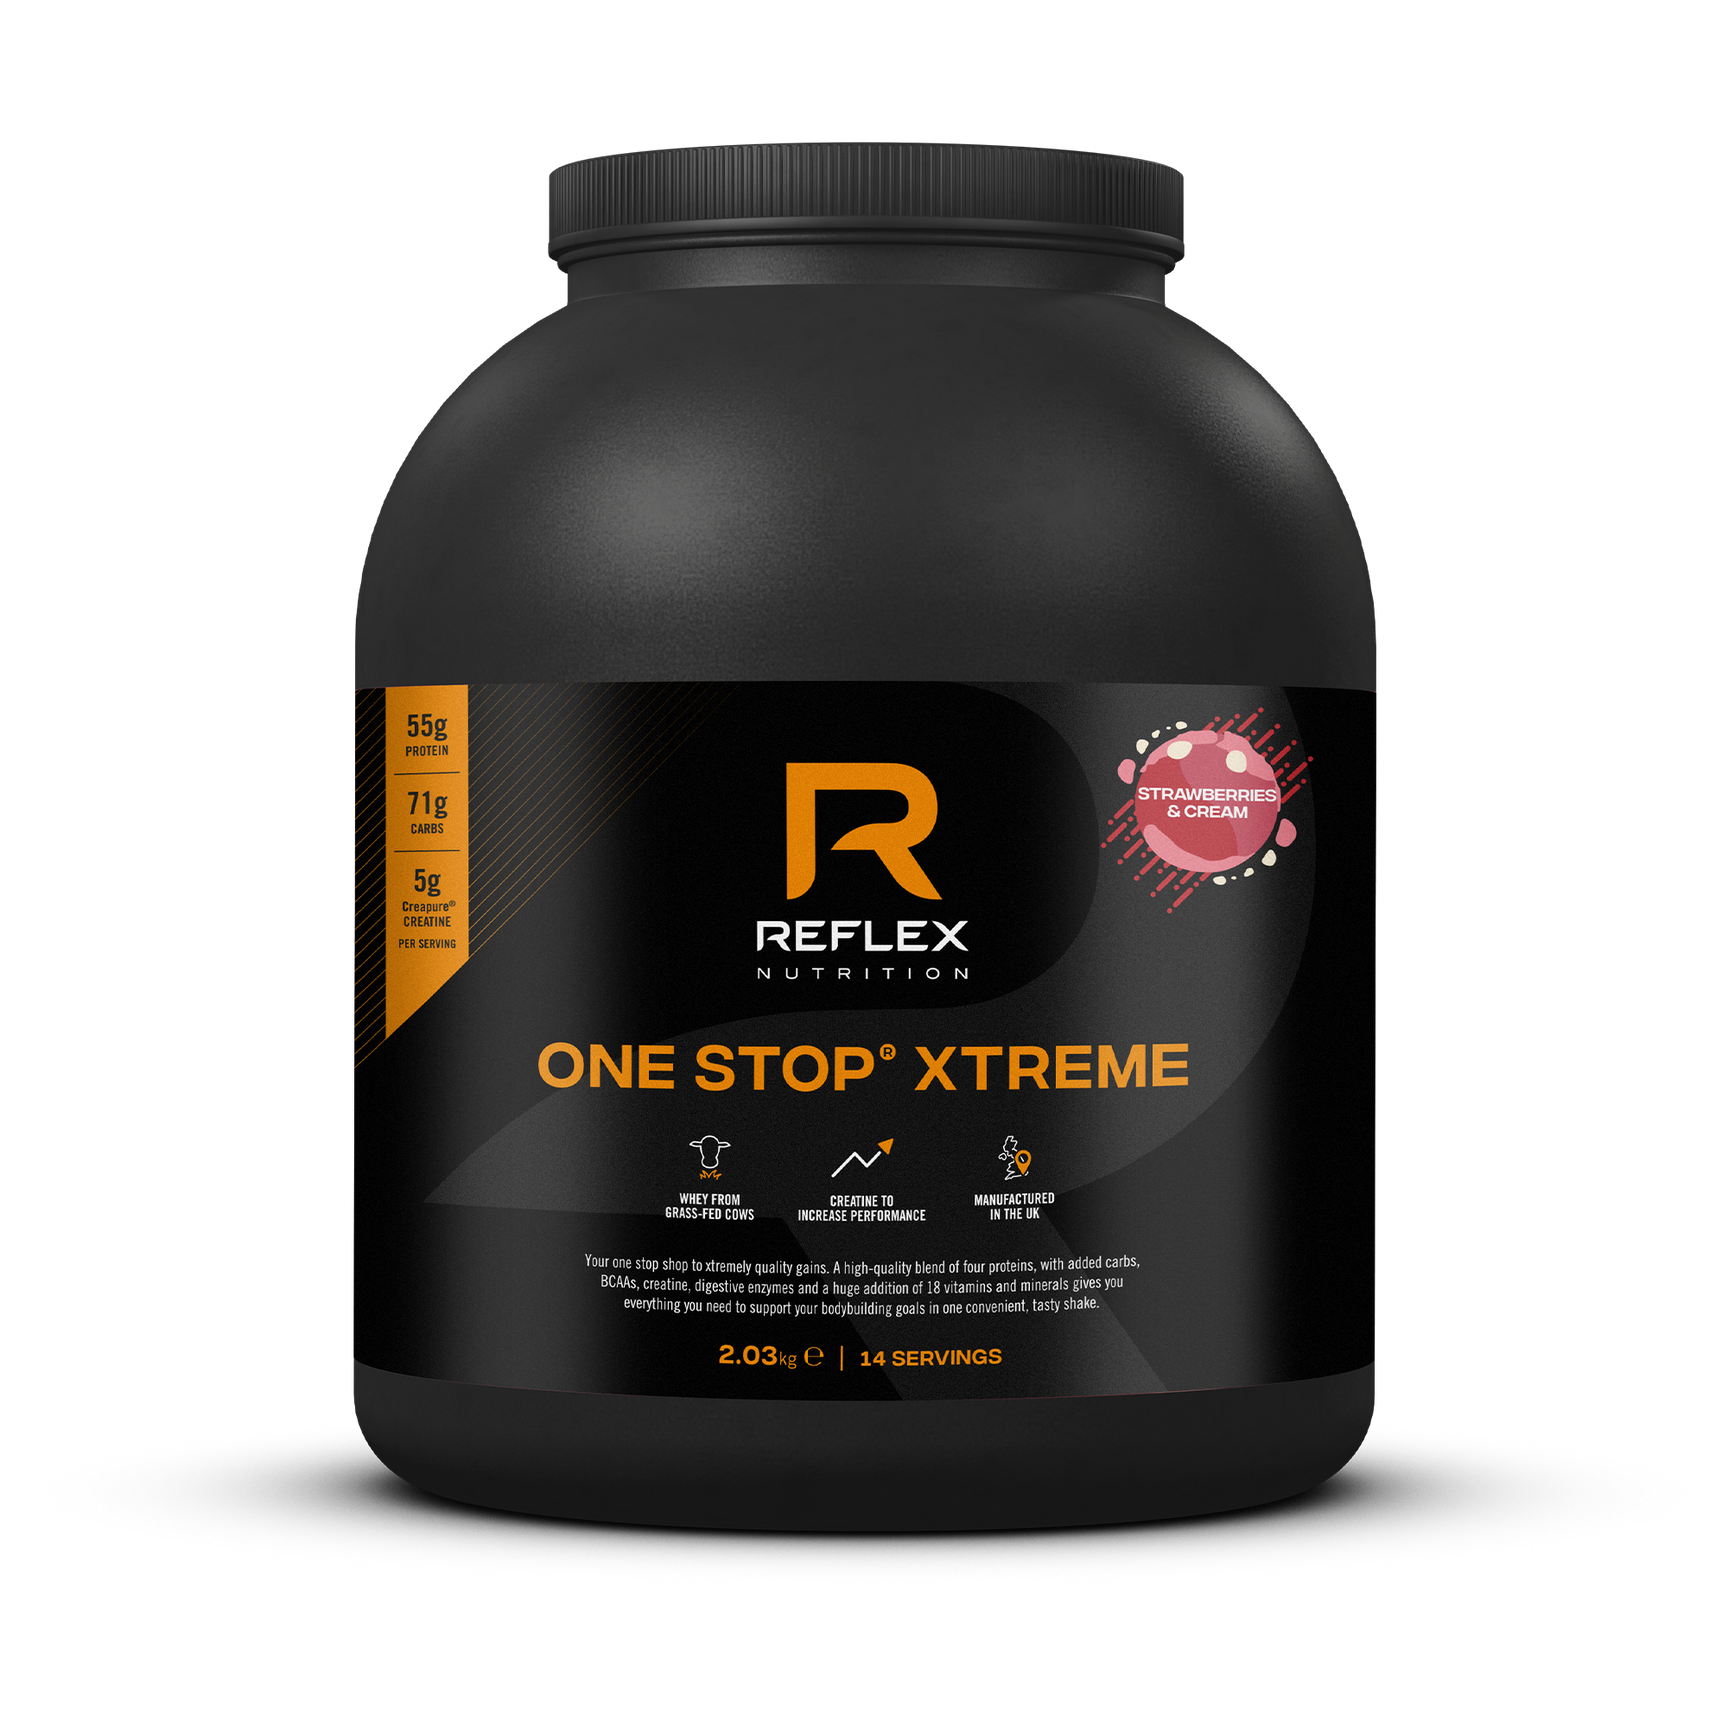 One Stop® Xtreme